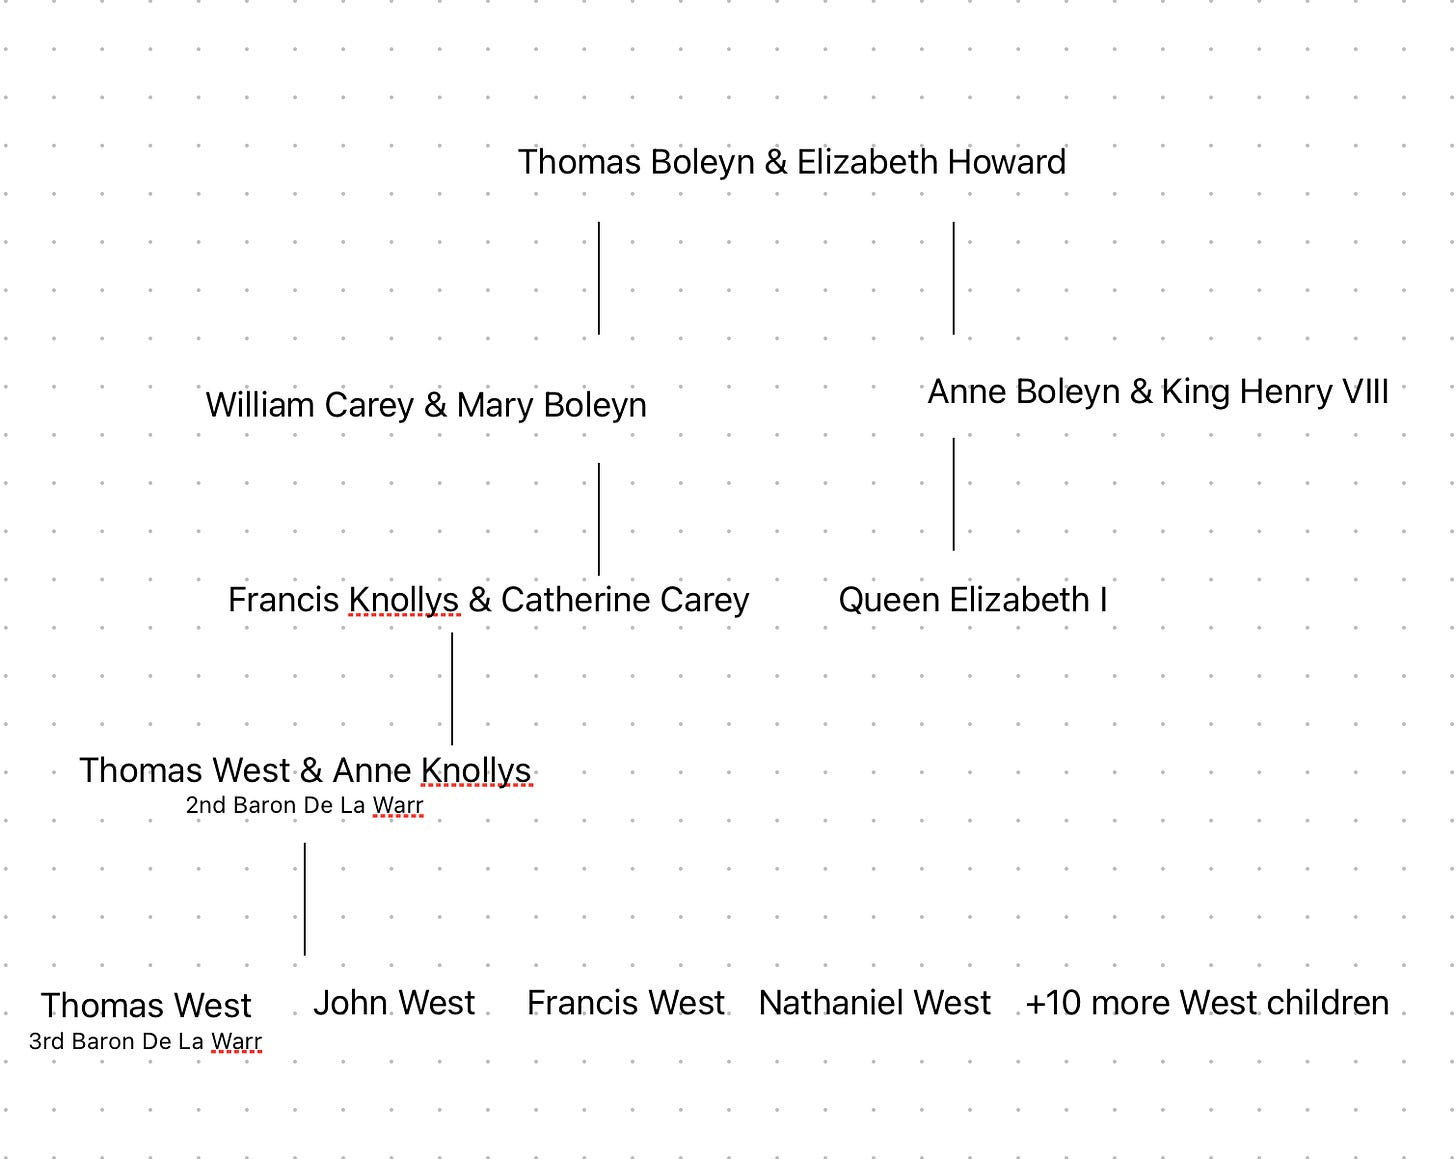 Family tree showing the Boleyn and Knollys connection between Anne Knollys and Queen Elizabeth